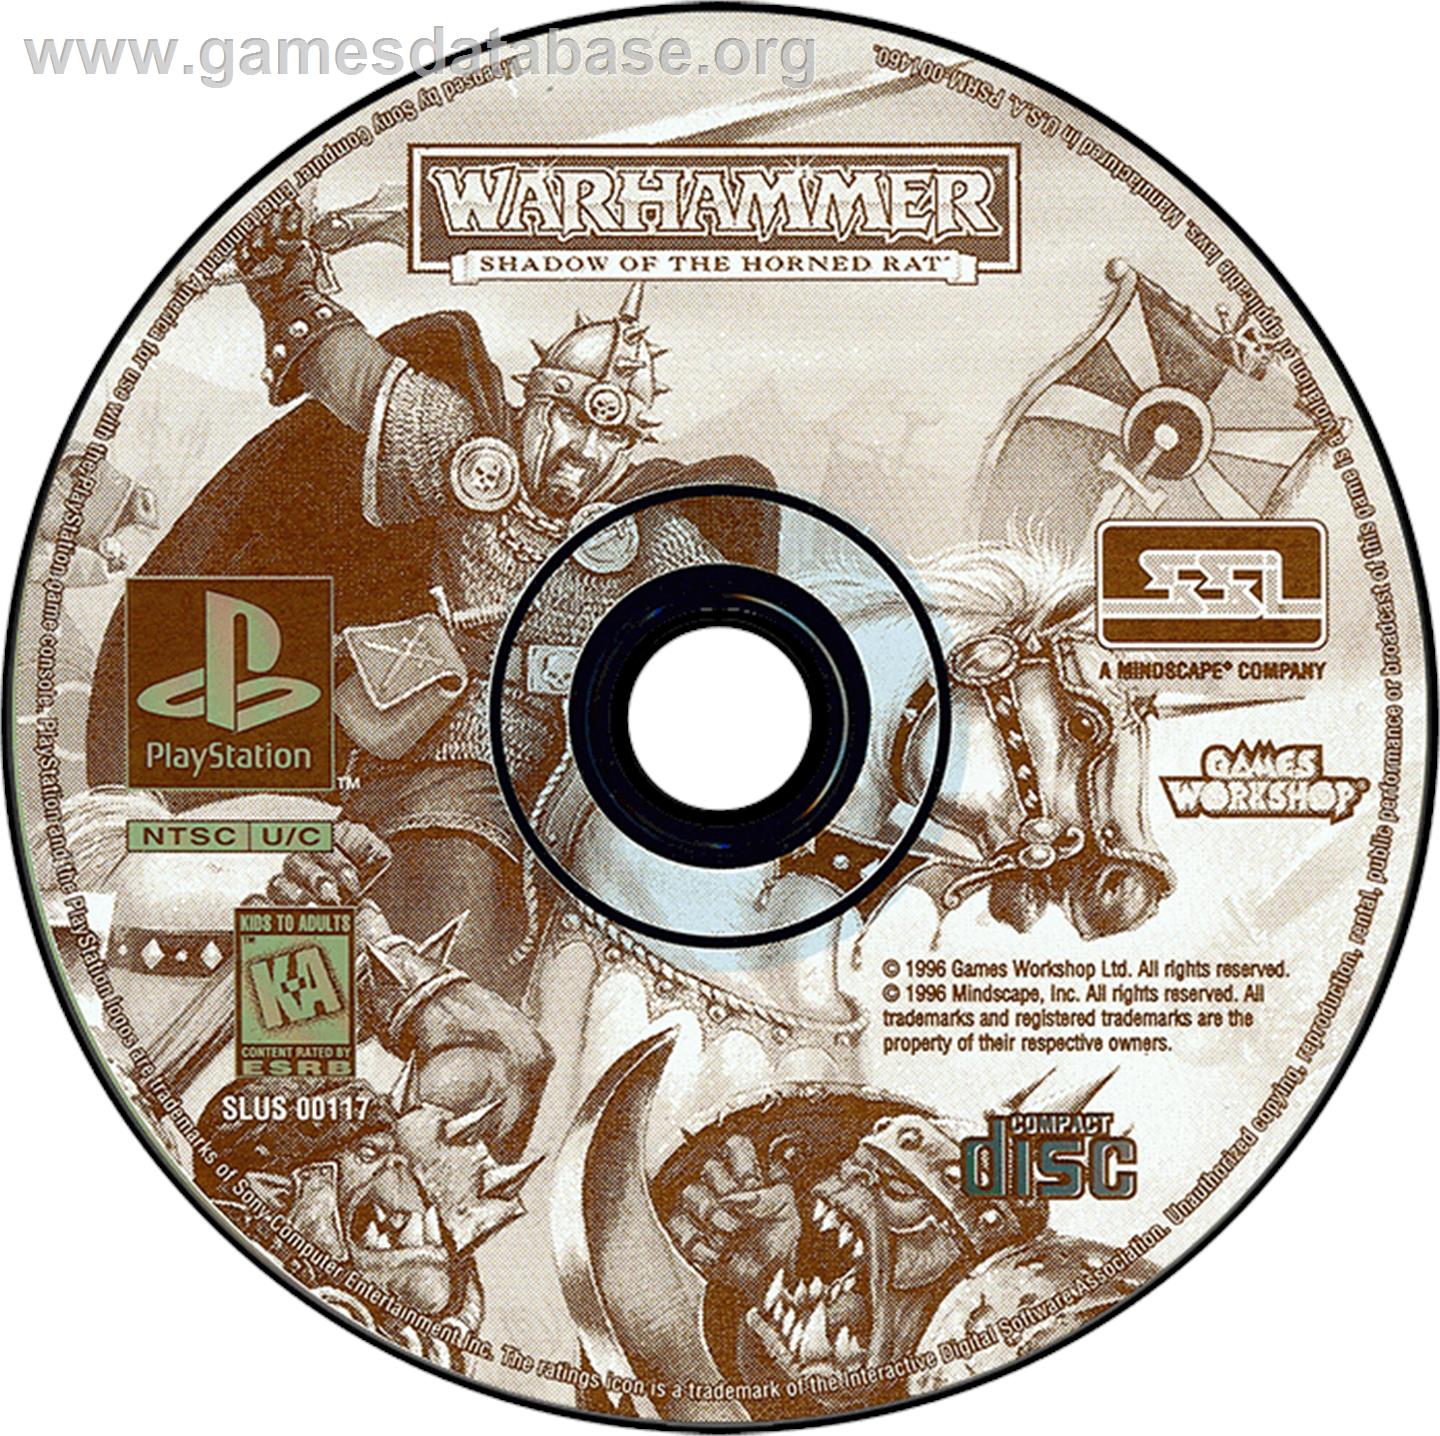 Warhammer: Shadow of the Horned Rat - Sony Playstation - Artwork - Disc